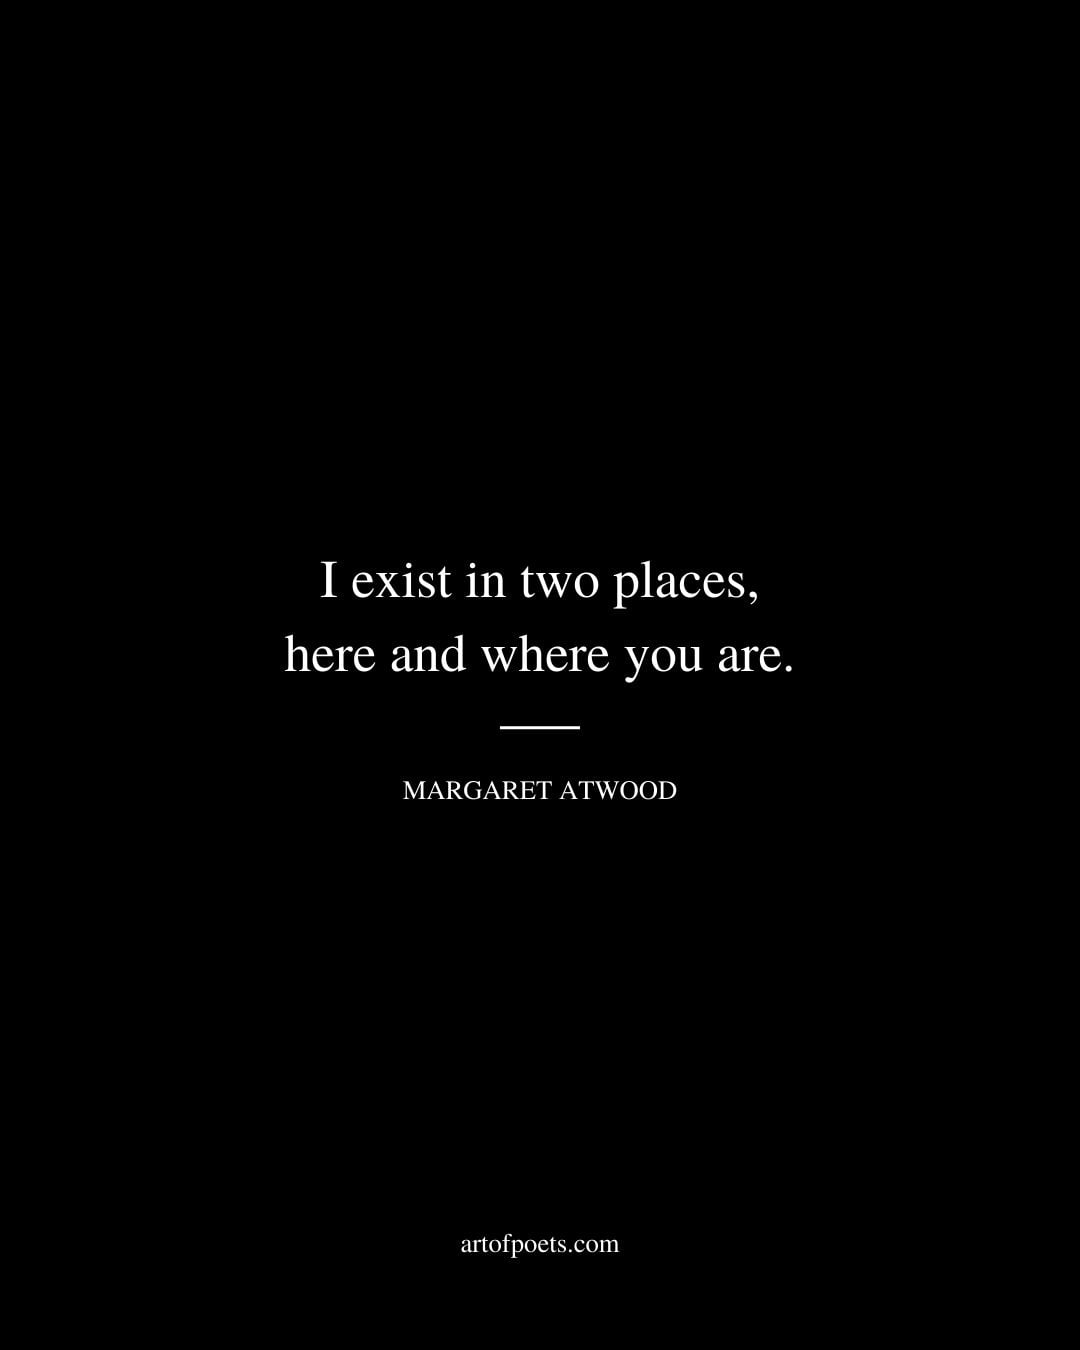 I exist in two places here and where you are